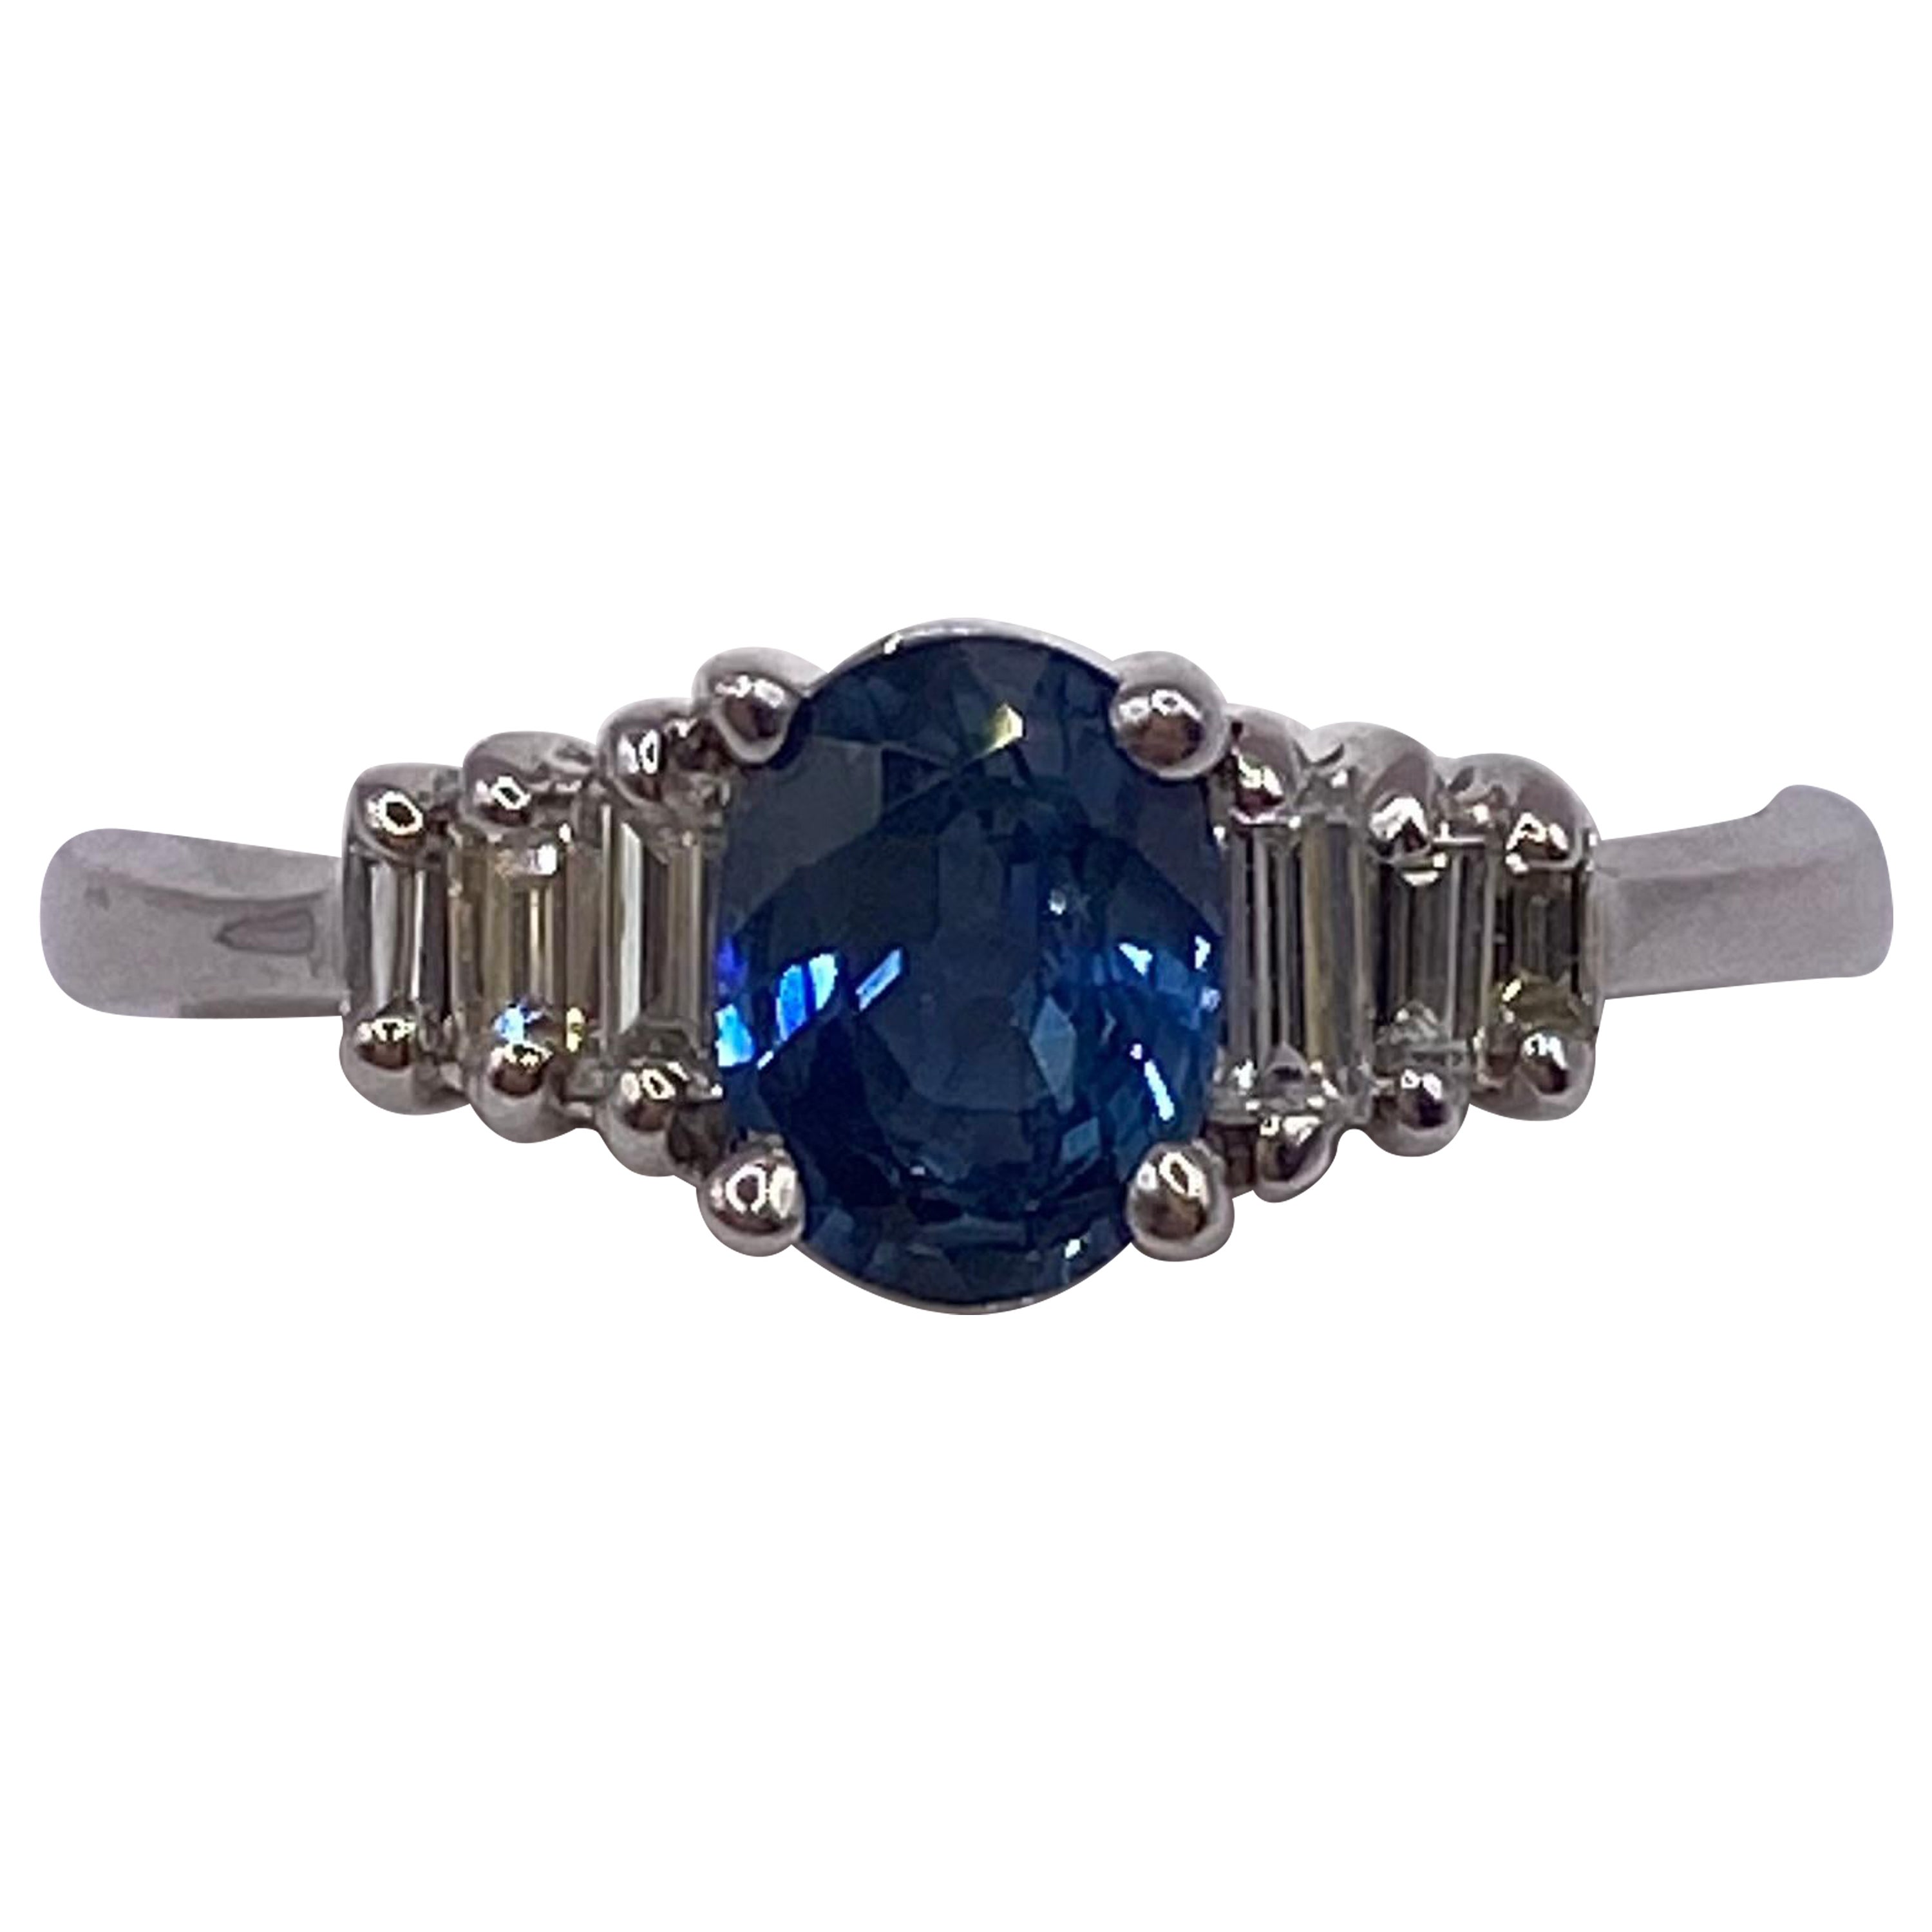 1.11ctw Oval Sapphire & Baguette Diamond Ring in 18KT White Gold